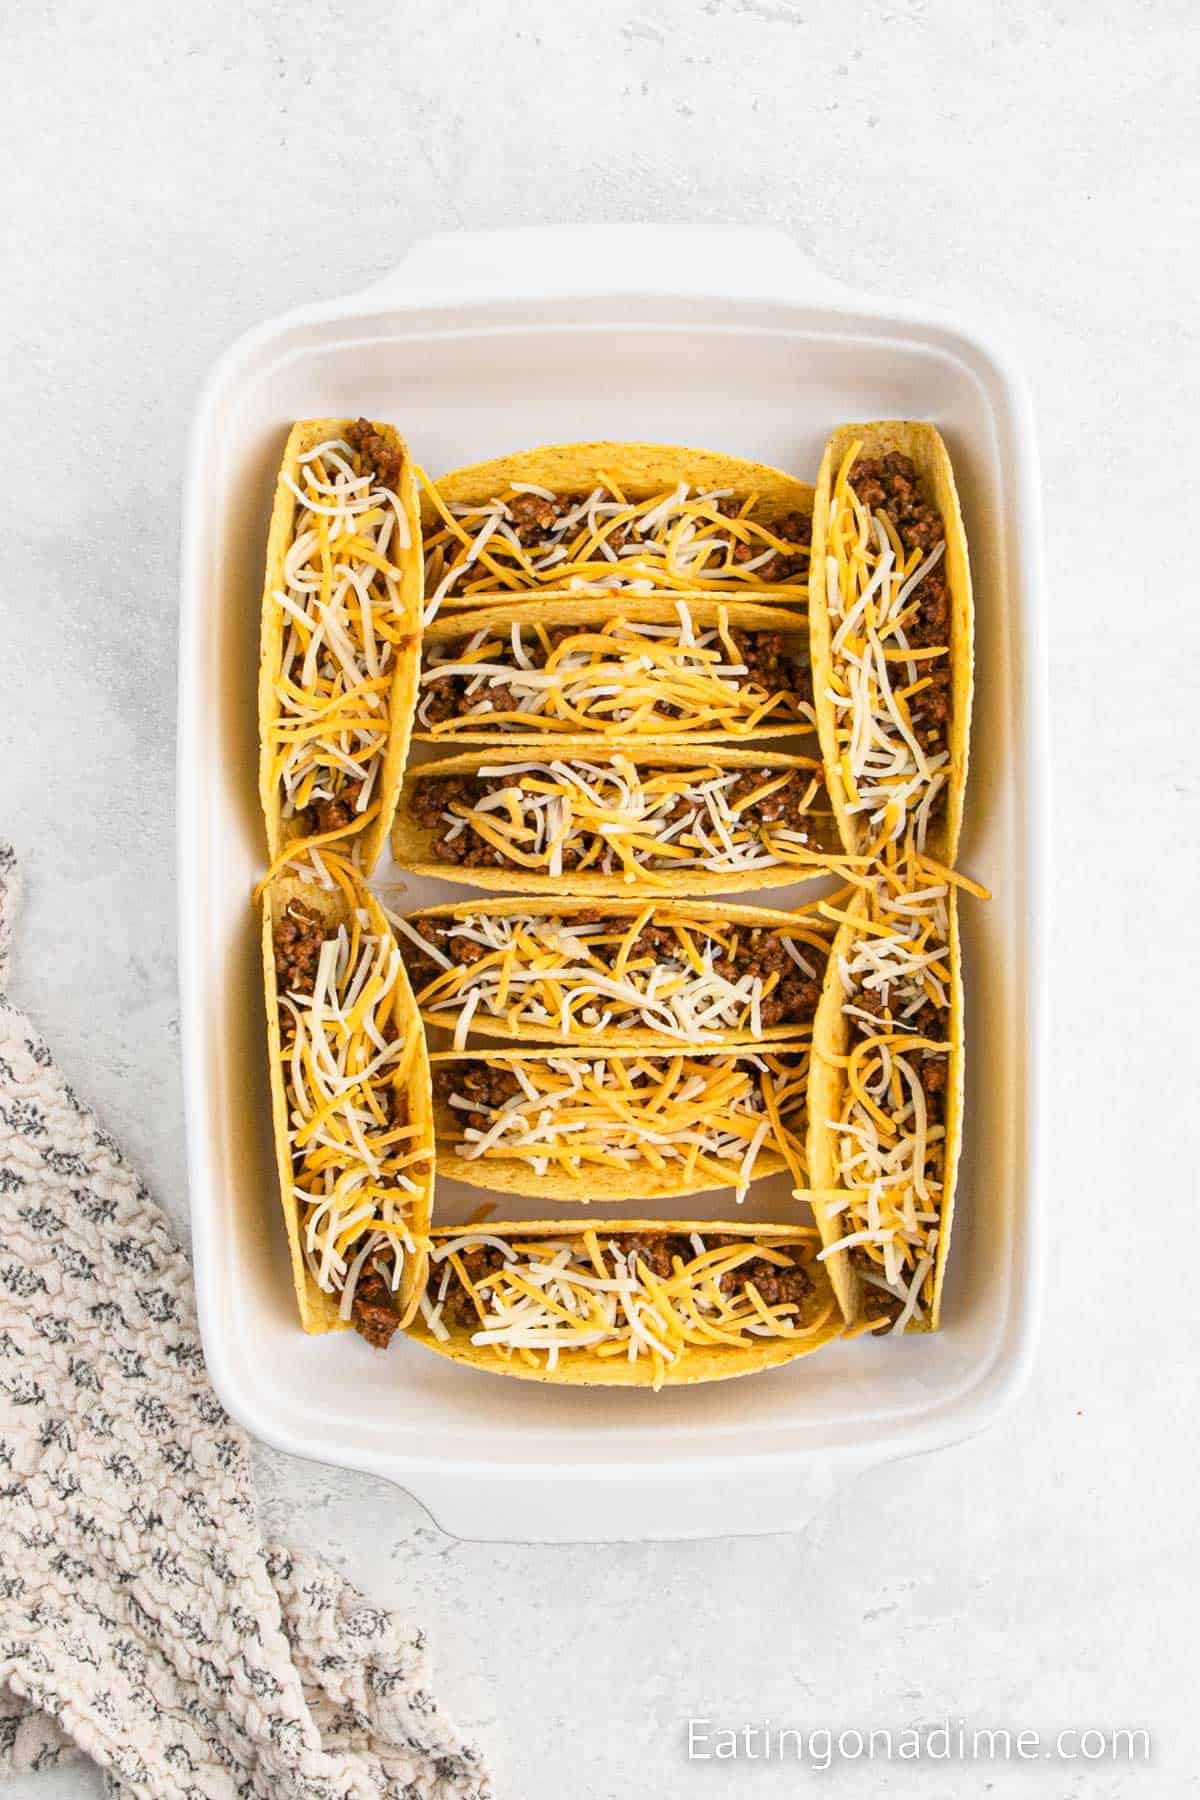 Placing filled taco shells in a baking dish topped with cheese